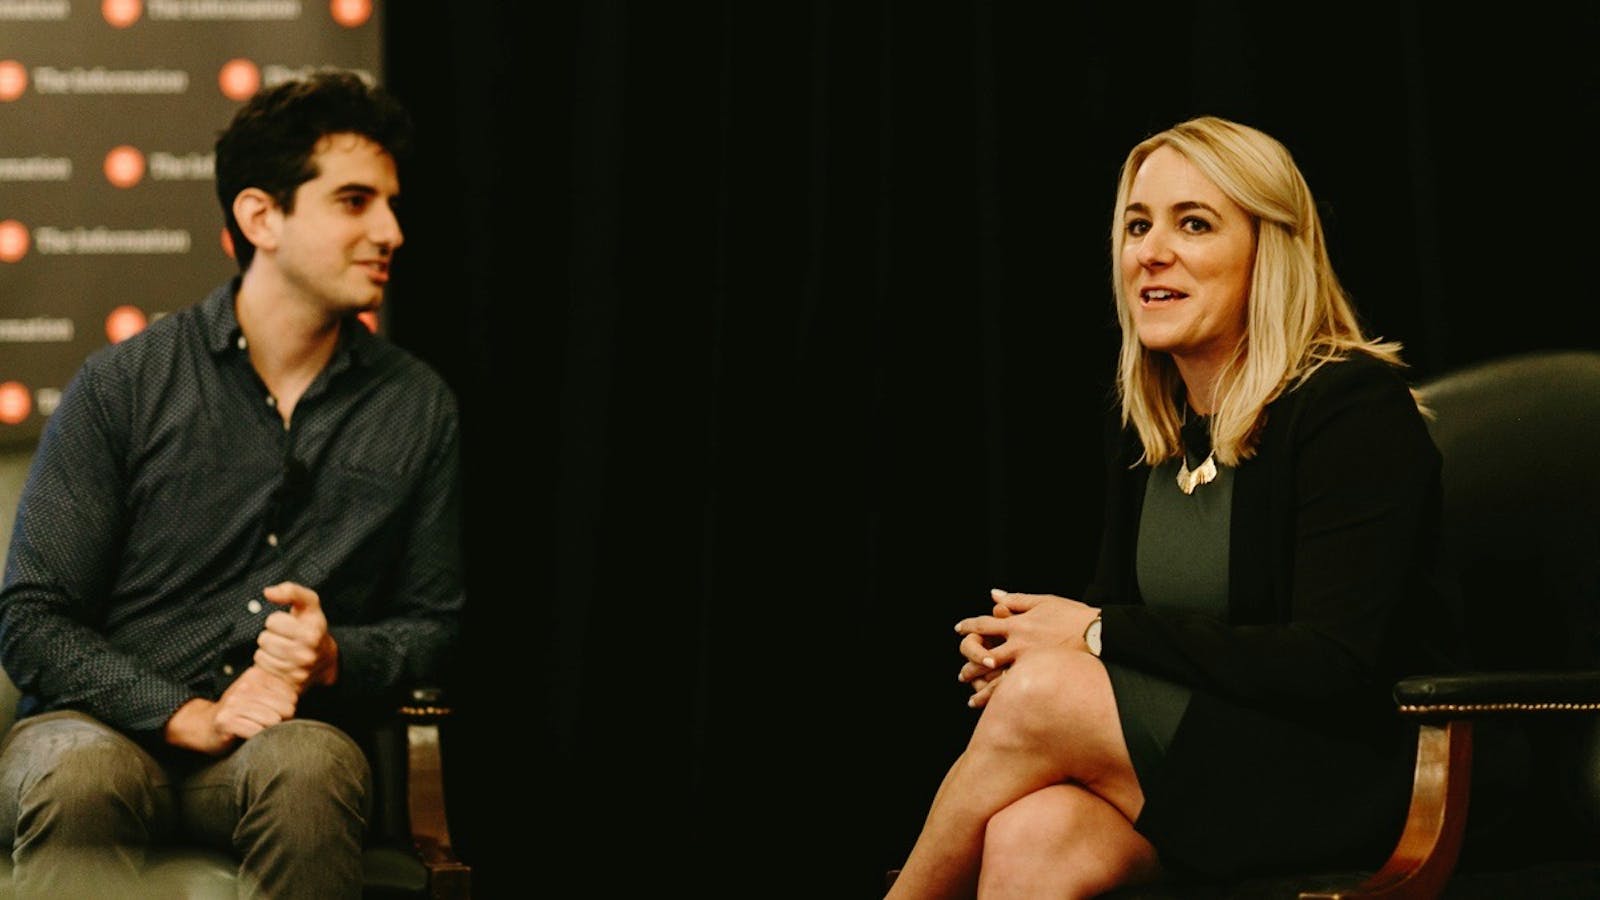 Slack's VP of product April Underwood talking with The Information's Tom Dotan at the NYC Subscriber Summit. Photo by Karen Obrist